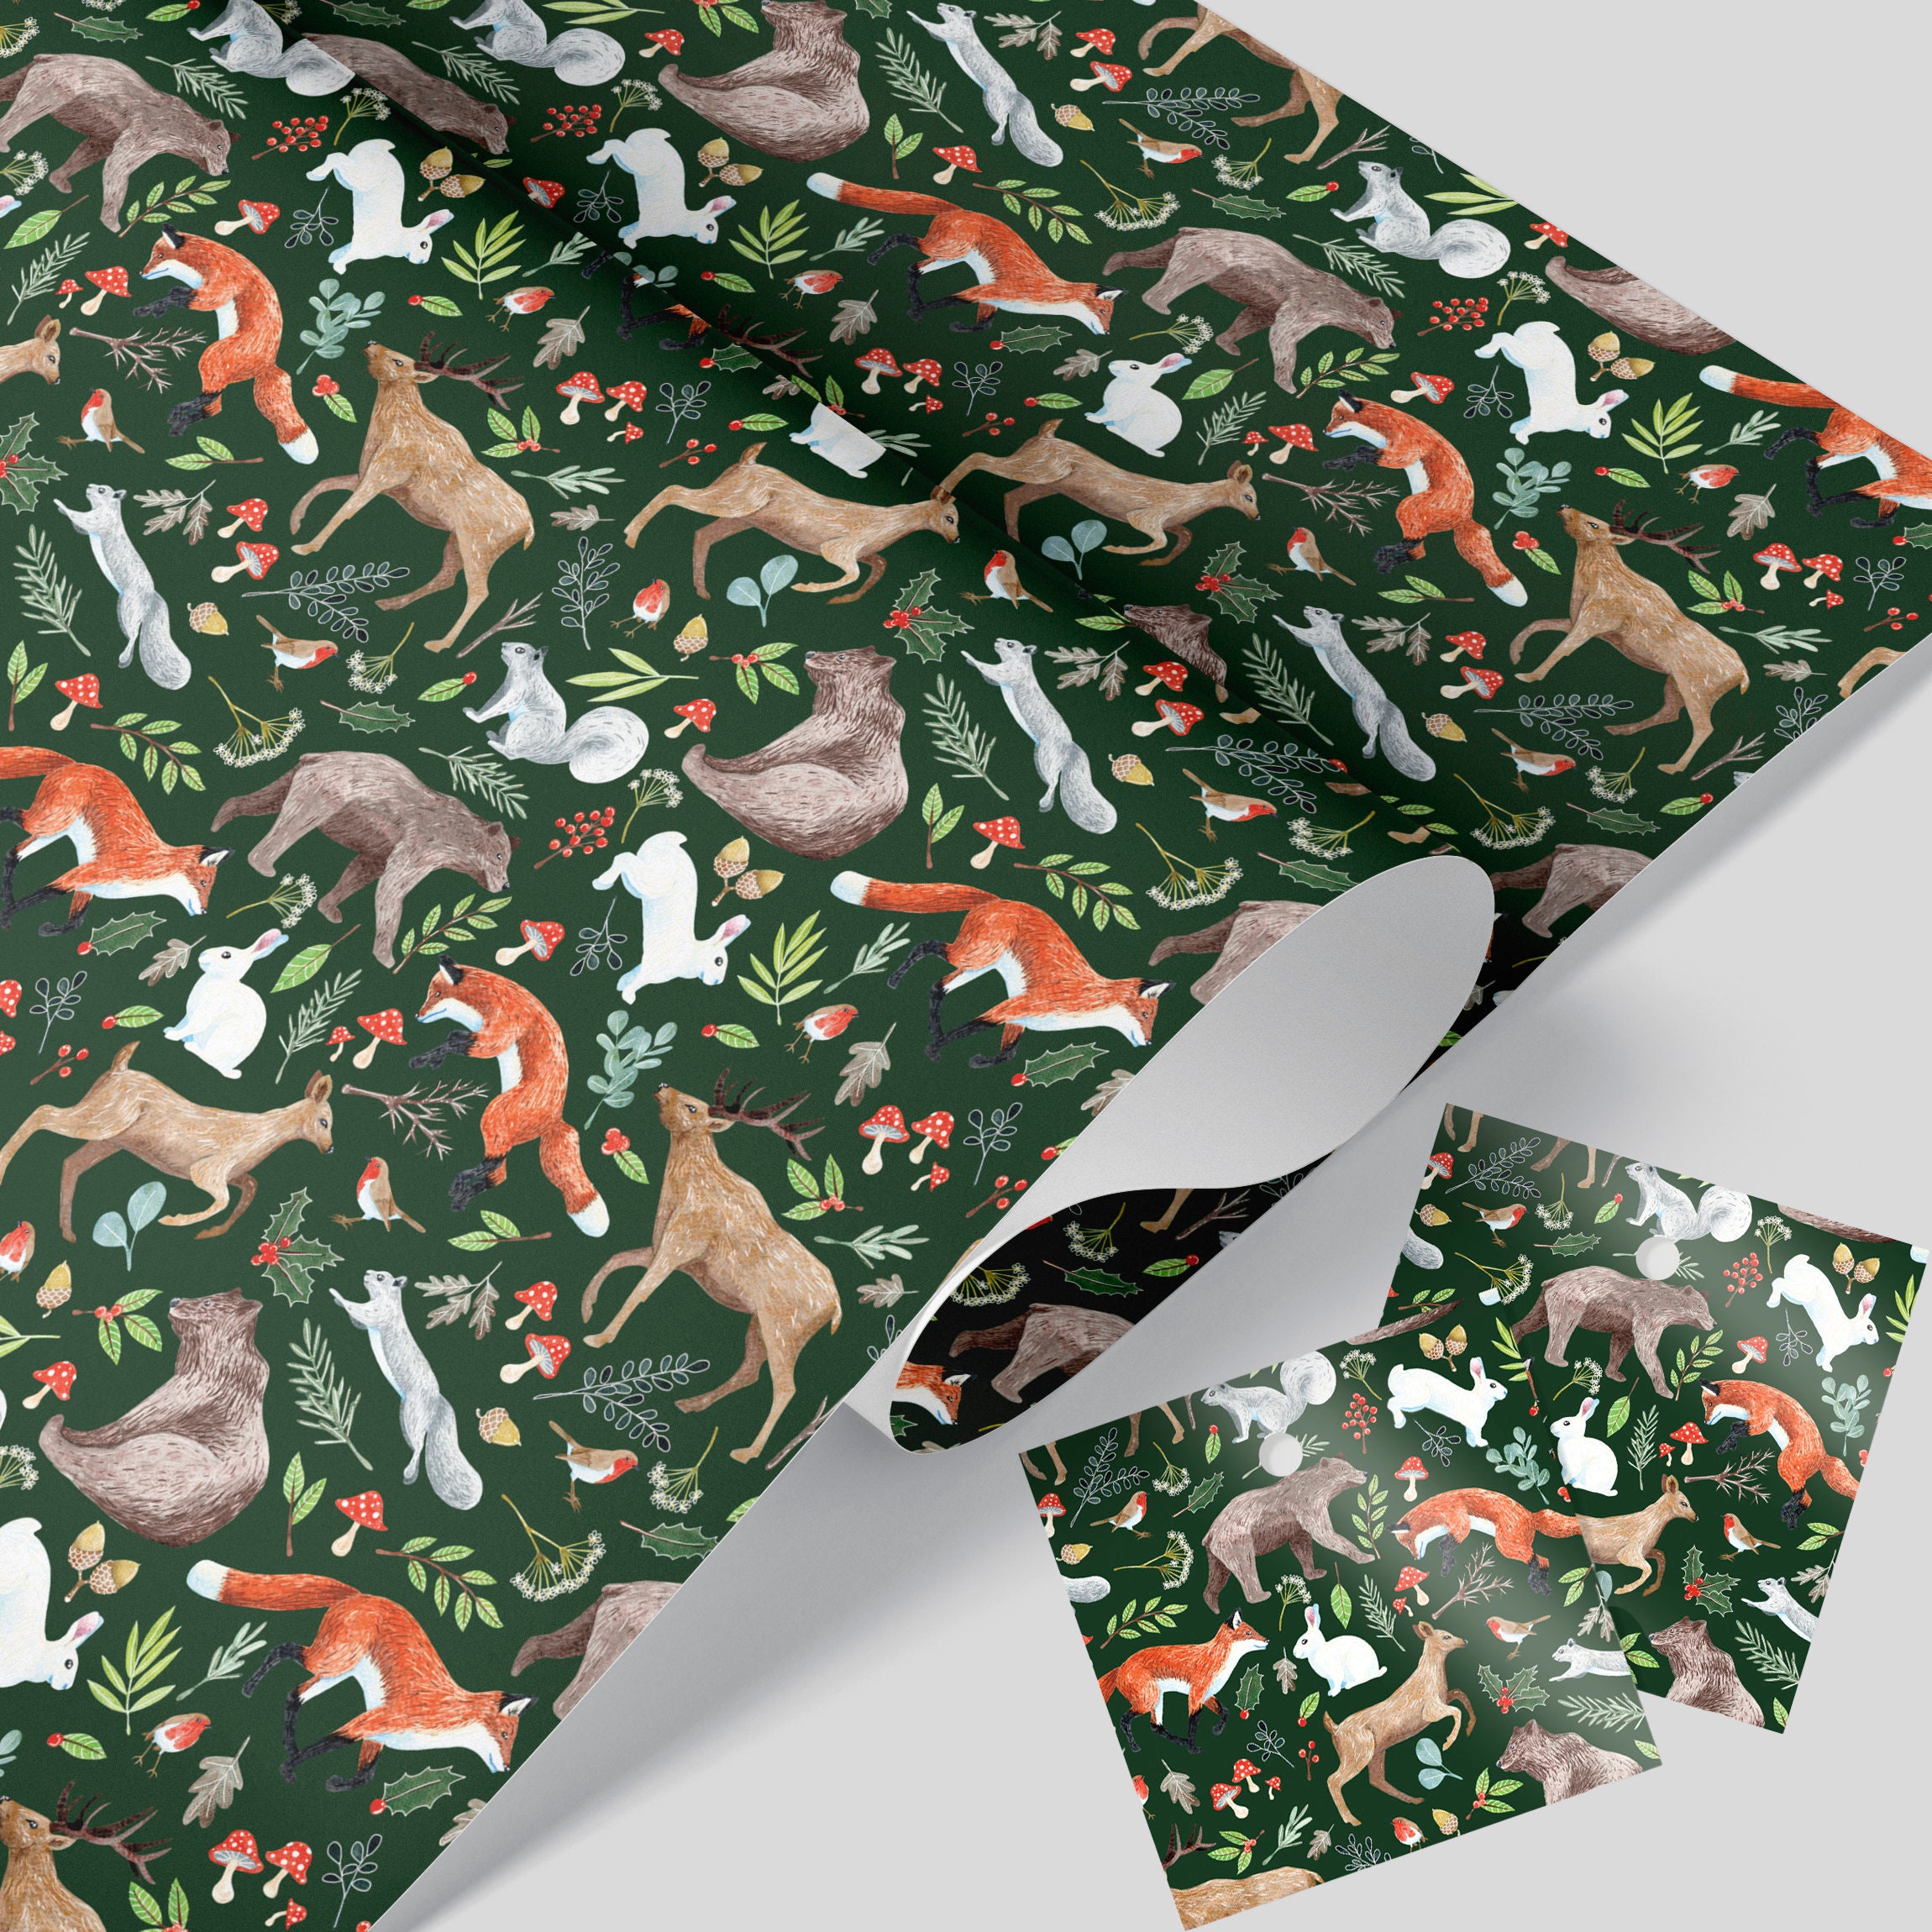 Woodland Animal Christmas Wrapping paper perfect for a magical Christmas.